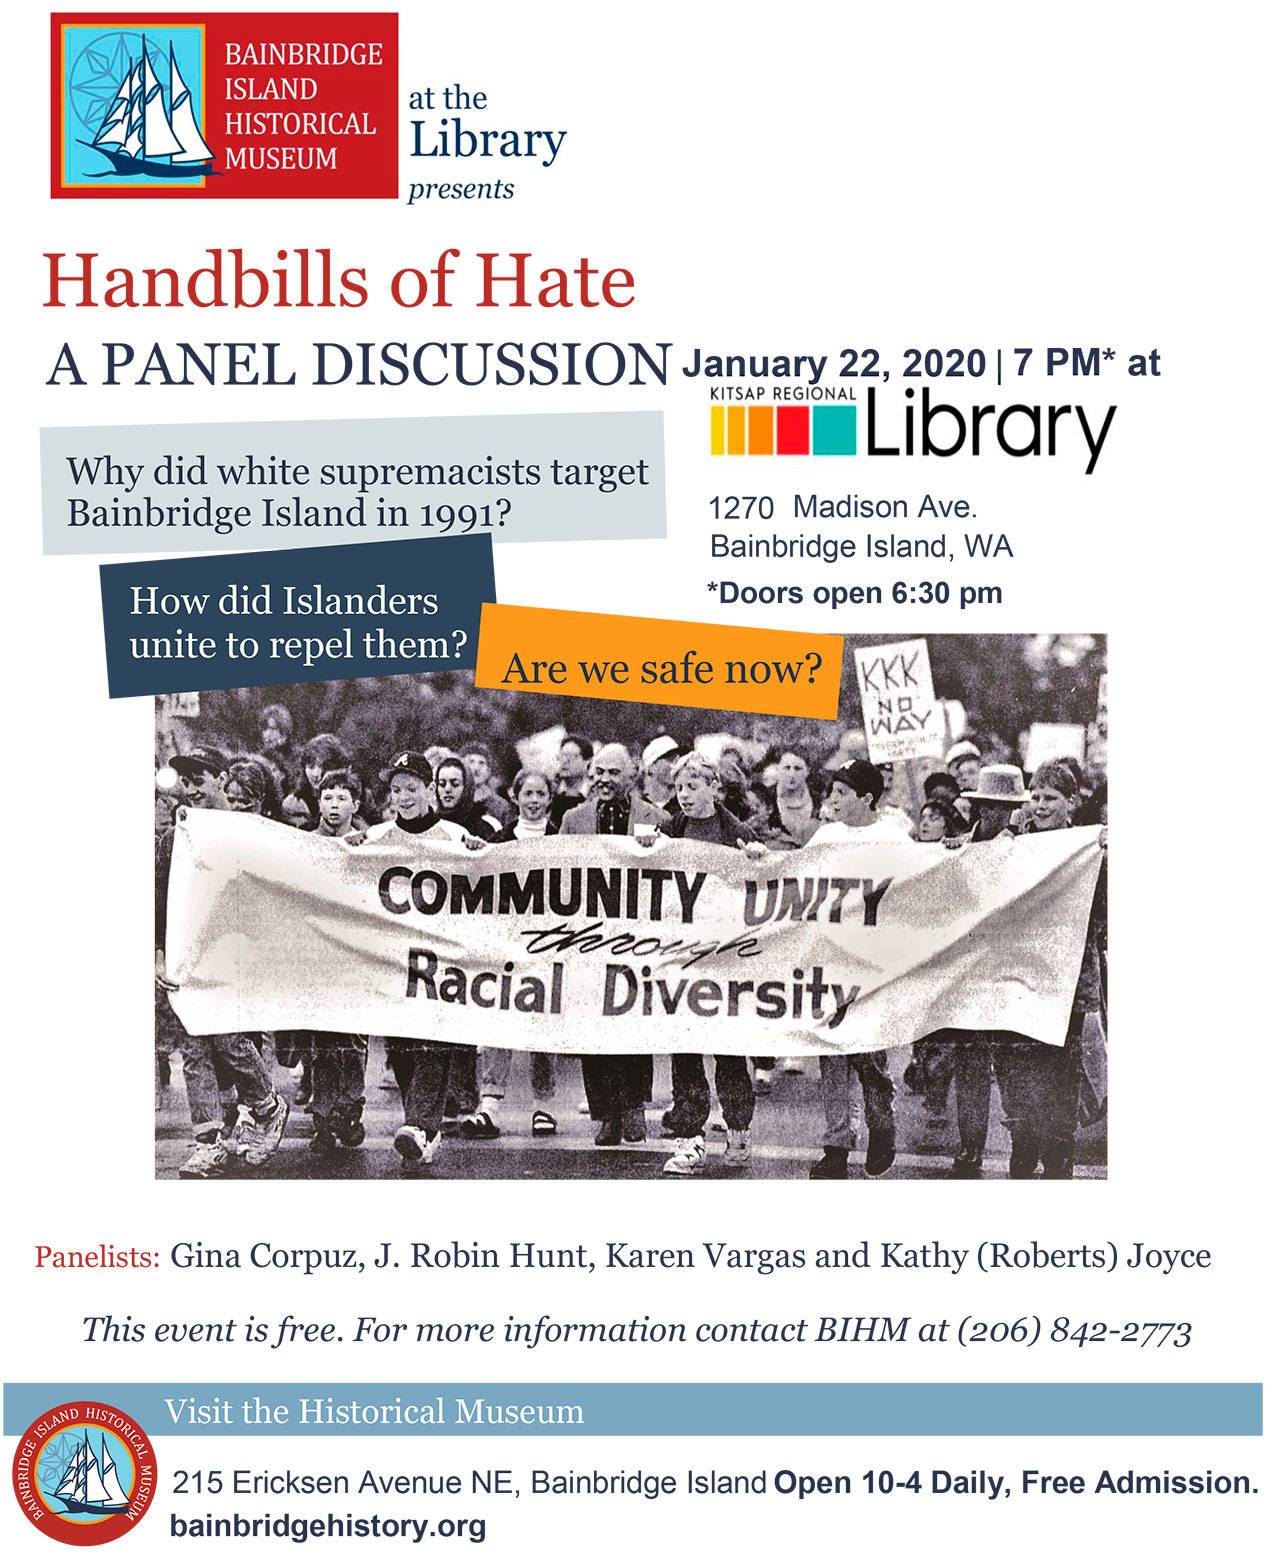 Image courtesy of J. Robin Hunt | “Handbills of Hate,” a panel discussion regarding the presence of white supremacists on Bainbridge in the early 1990s, as well as current local issues of racial equality, will be held at the Bainbridge Public Library at 7 p.m. Wednesday, Jan. 22.